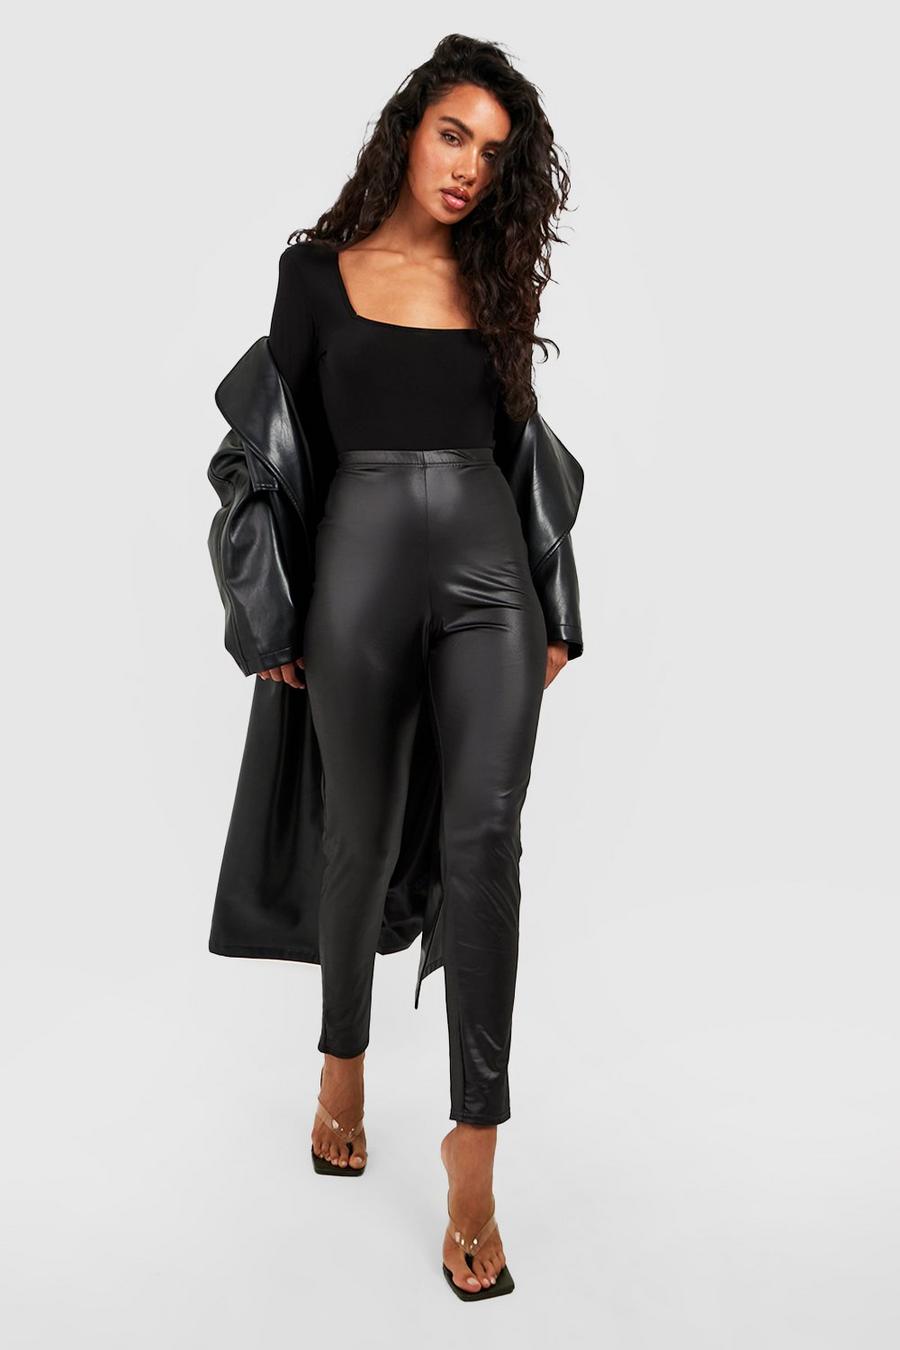 Missguided Black Faux Leather Flared Trousers  Leather pants, Outfits with  leggings, Flared pants outfit